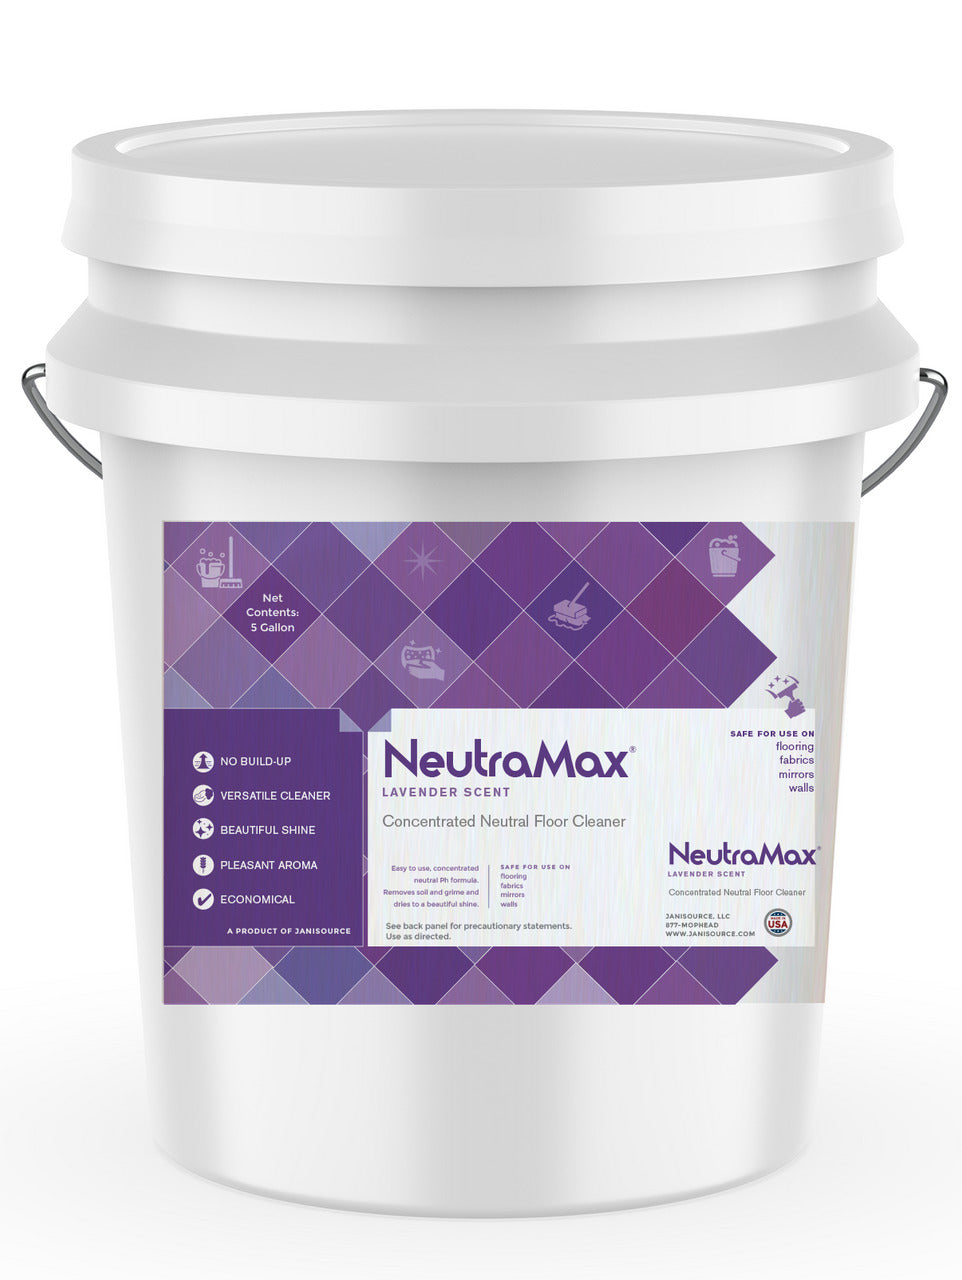 JaniSource Neutramax Neutral Floor Cleaner Lavender Scented Concentrated, 5 Gal 